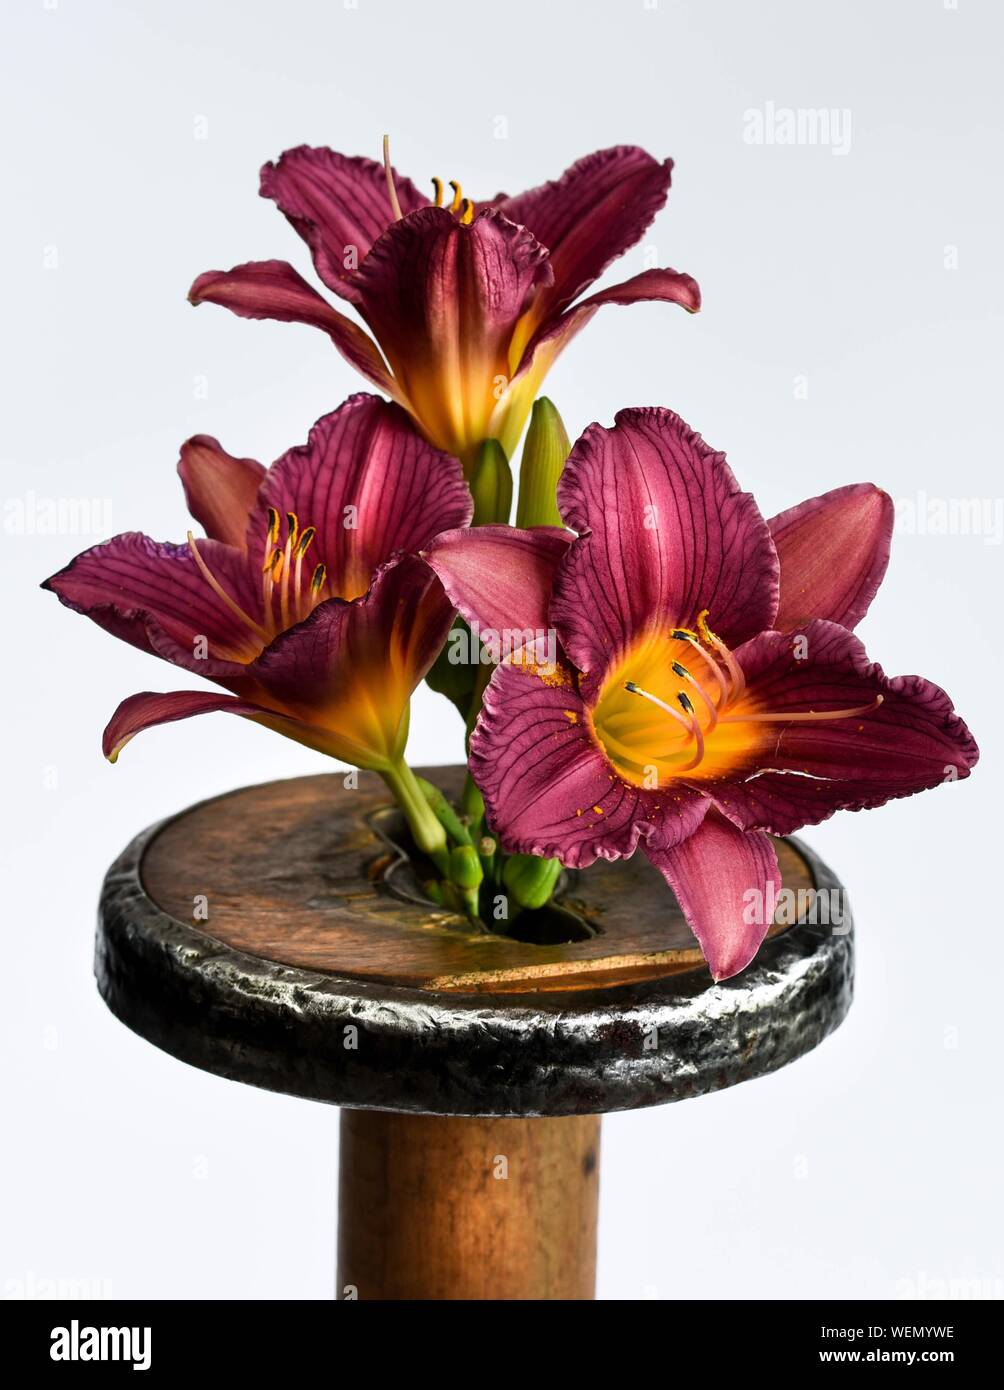 Lilies On Wooden Stool Against White Wall Stock Photo